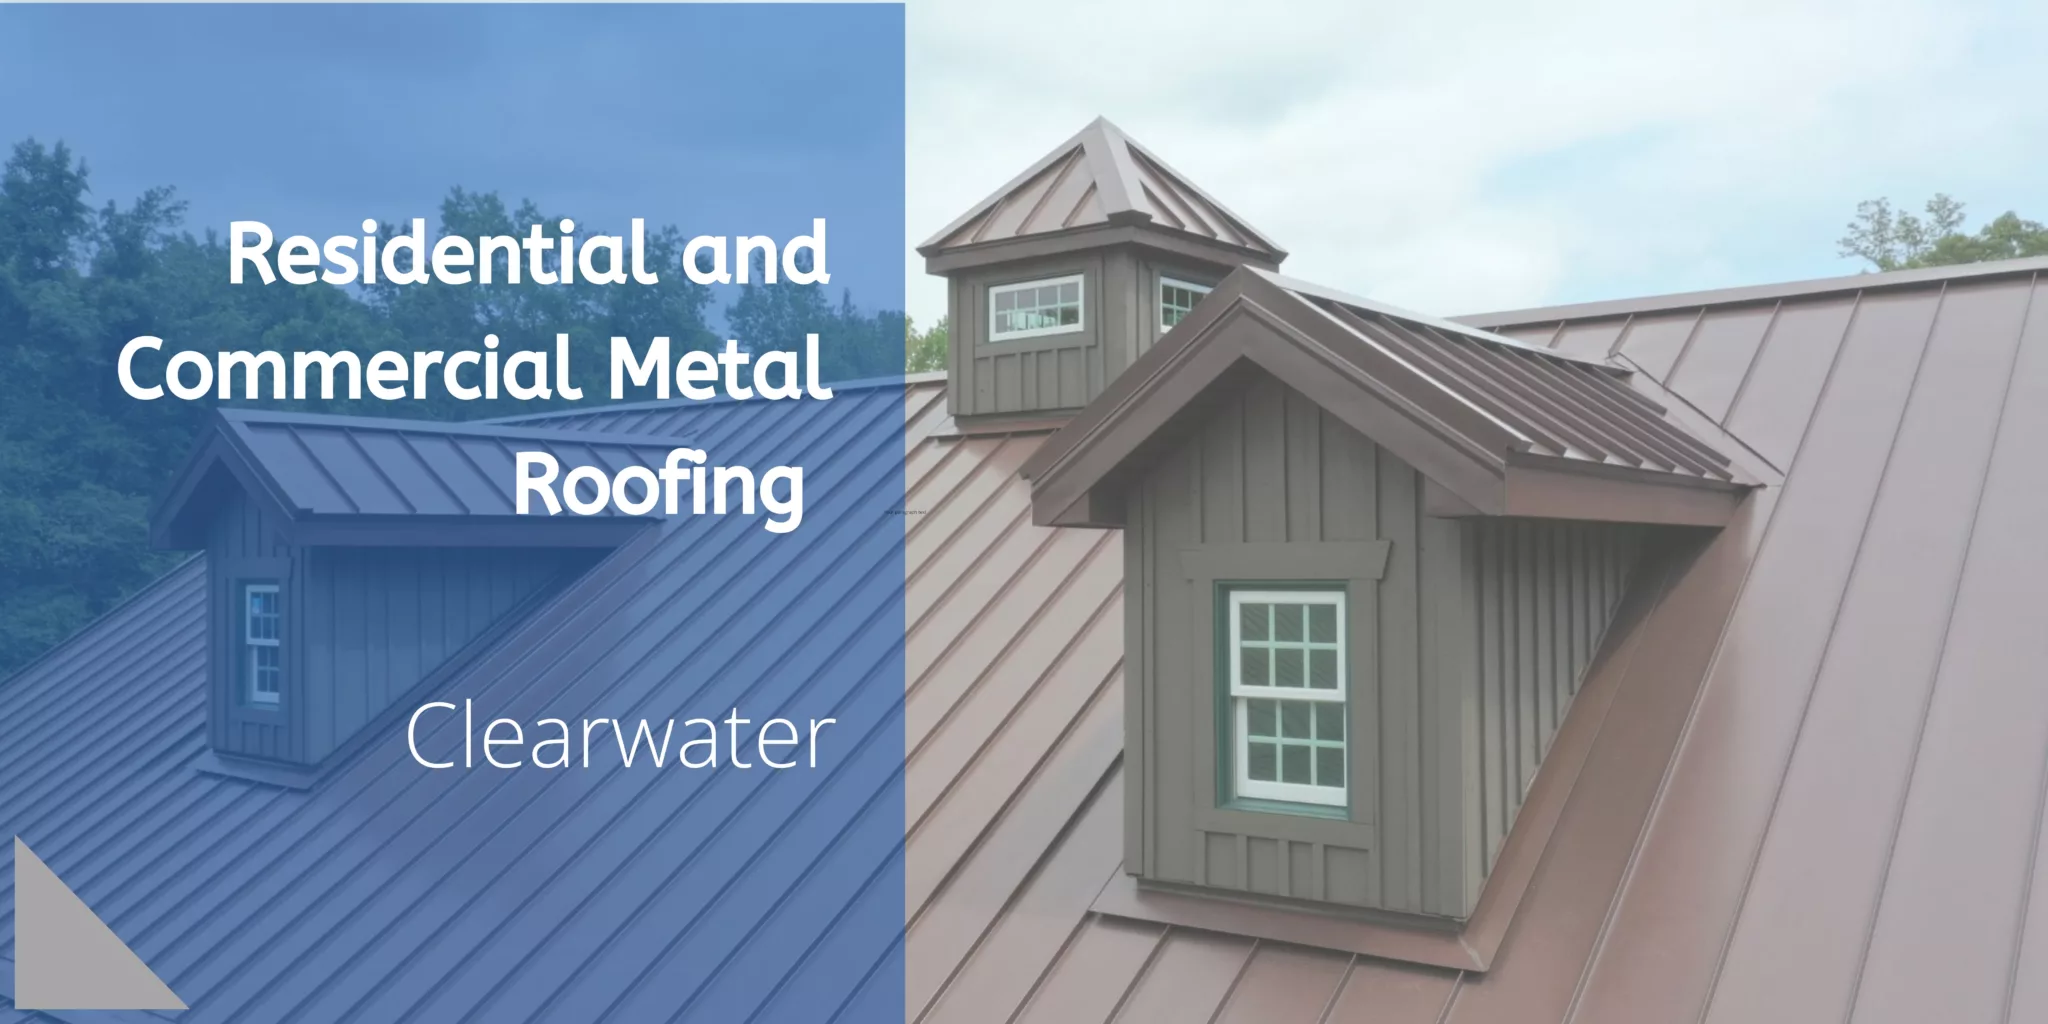 Clearwater residential and commercial metal roofing